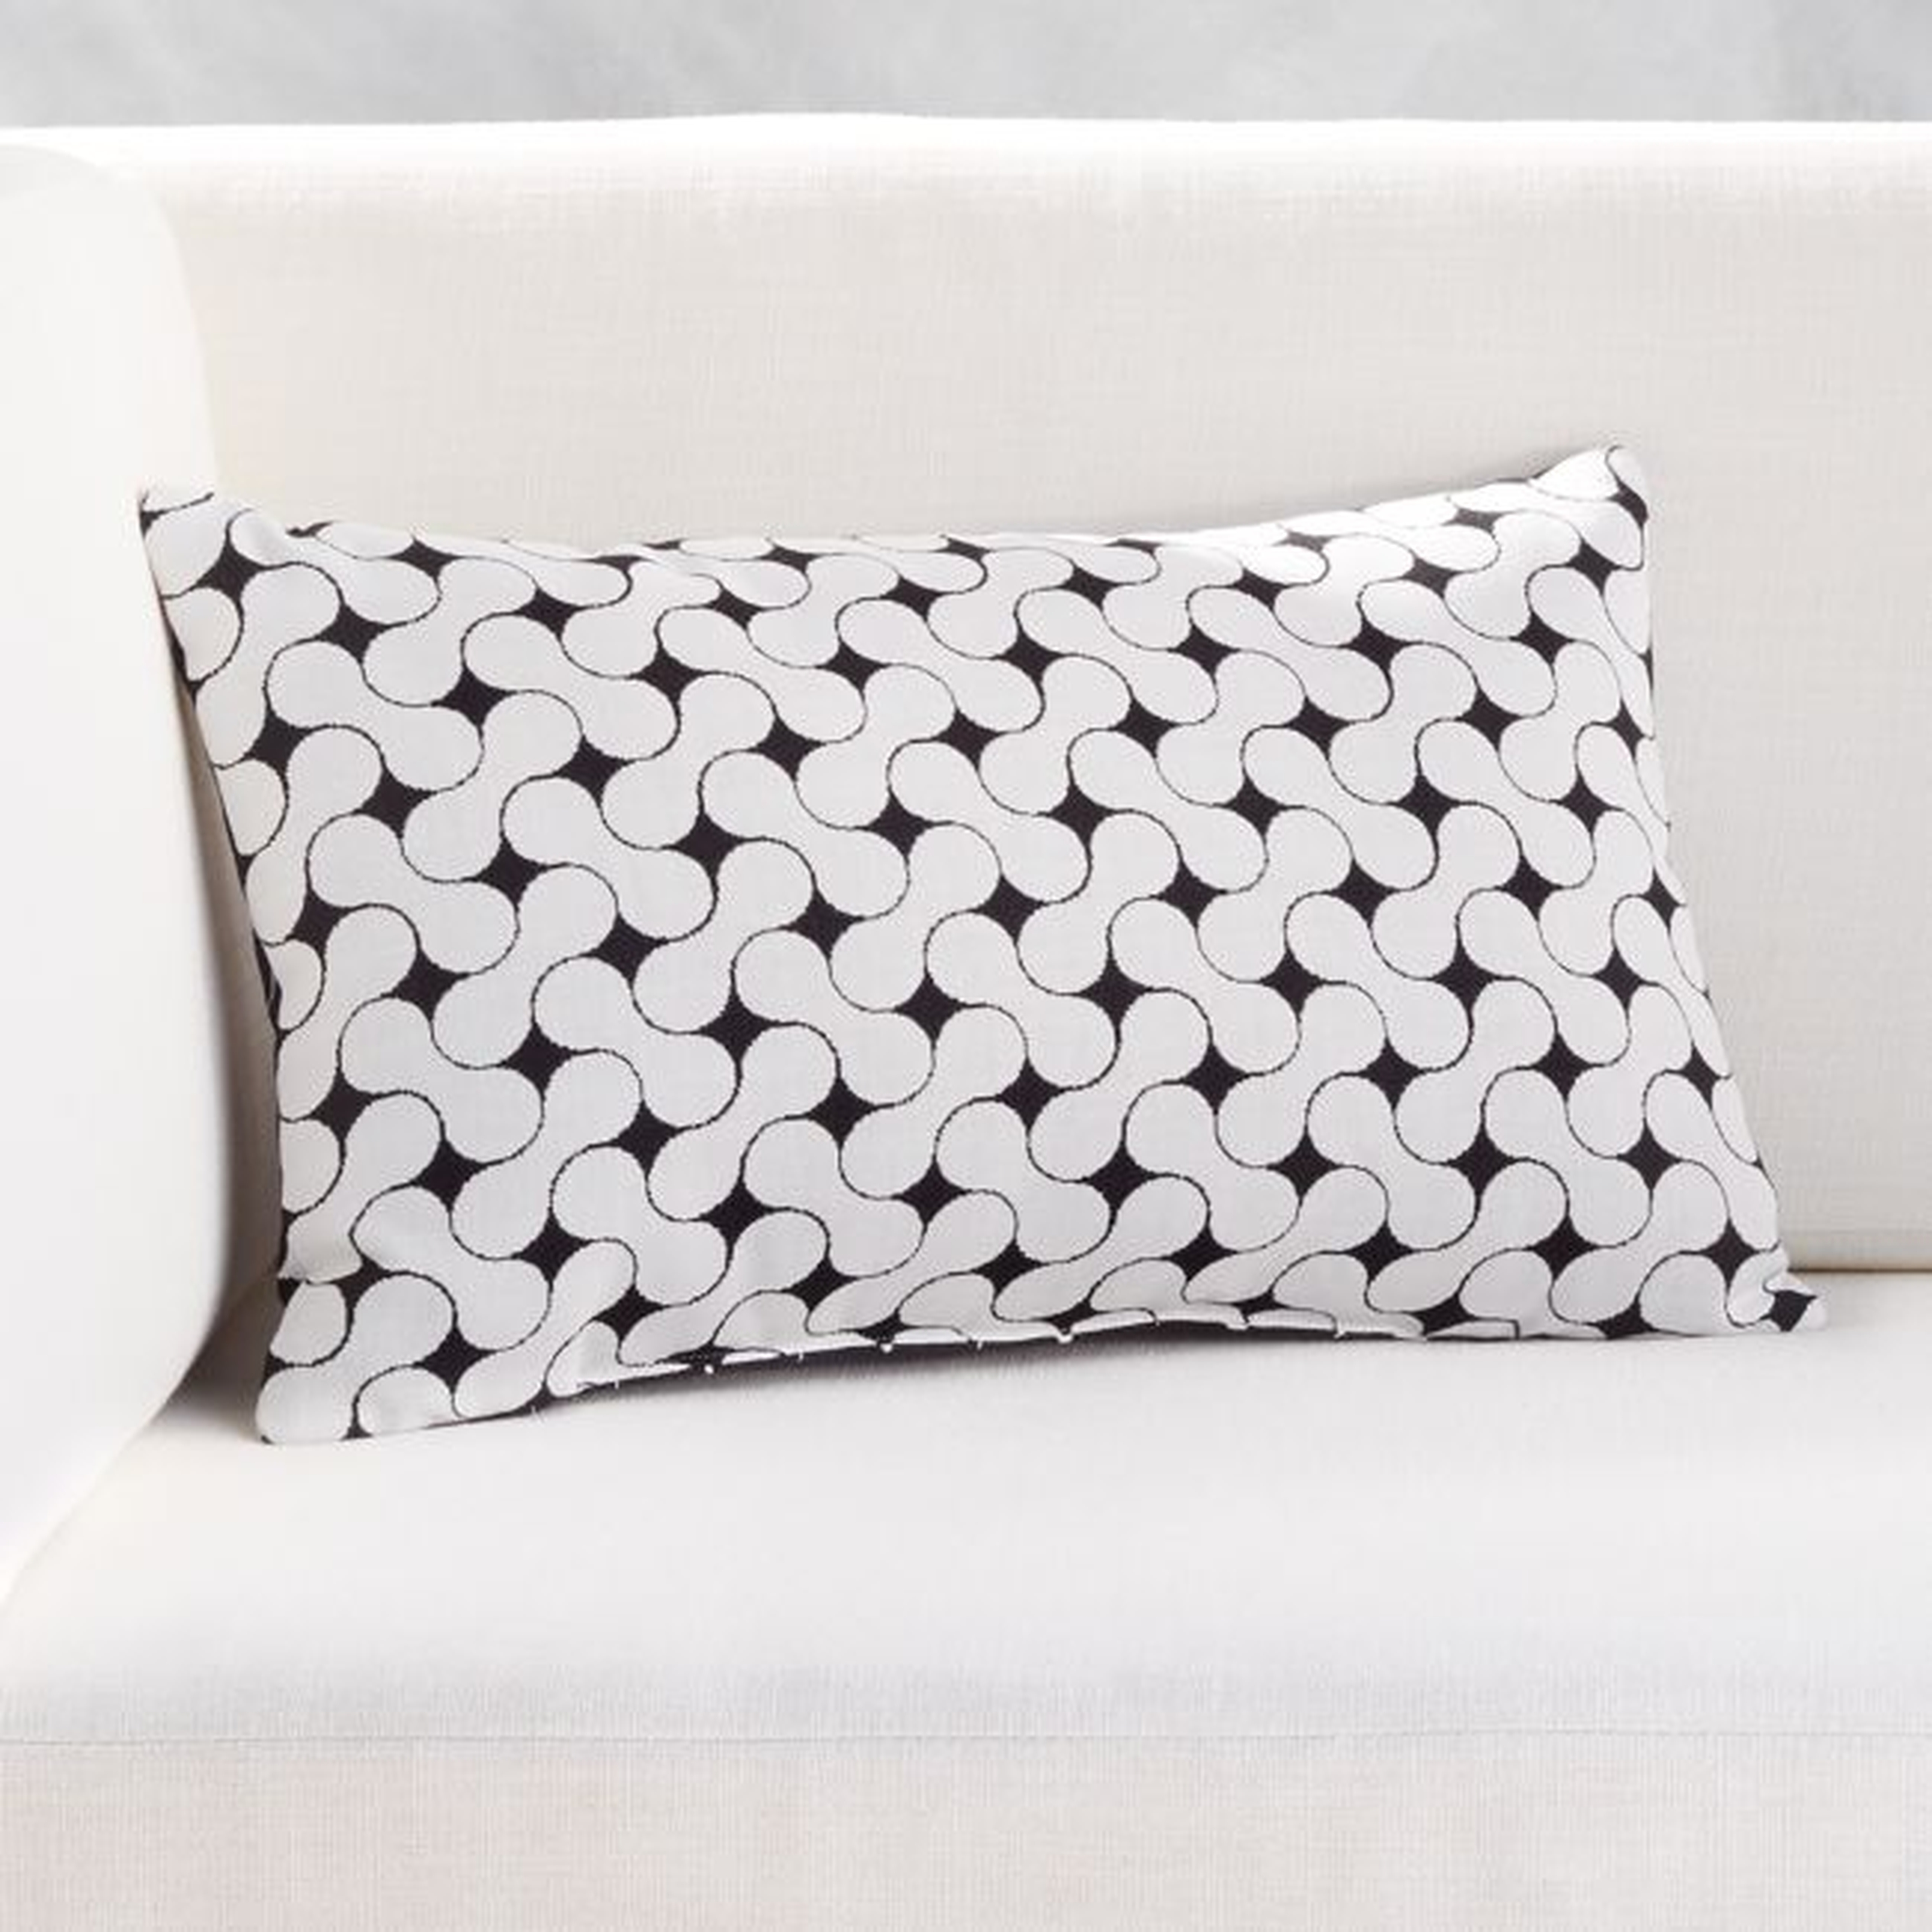 20"x12" Forme Black and White Outdoor Pillow - CB2